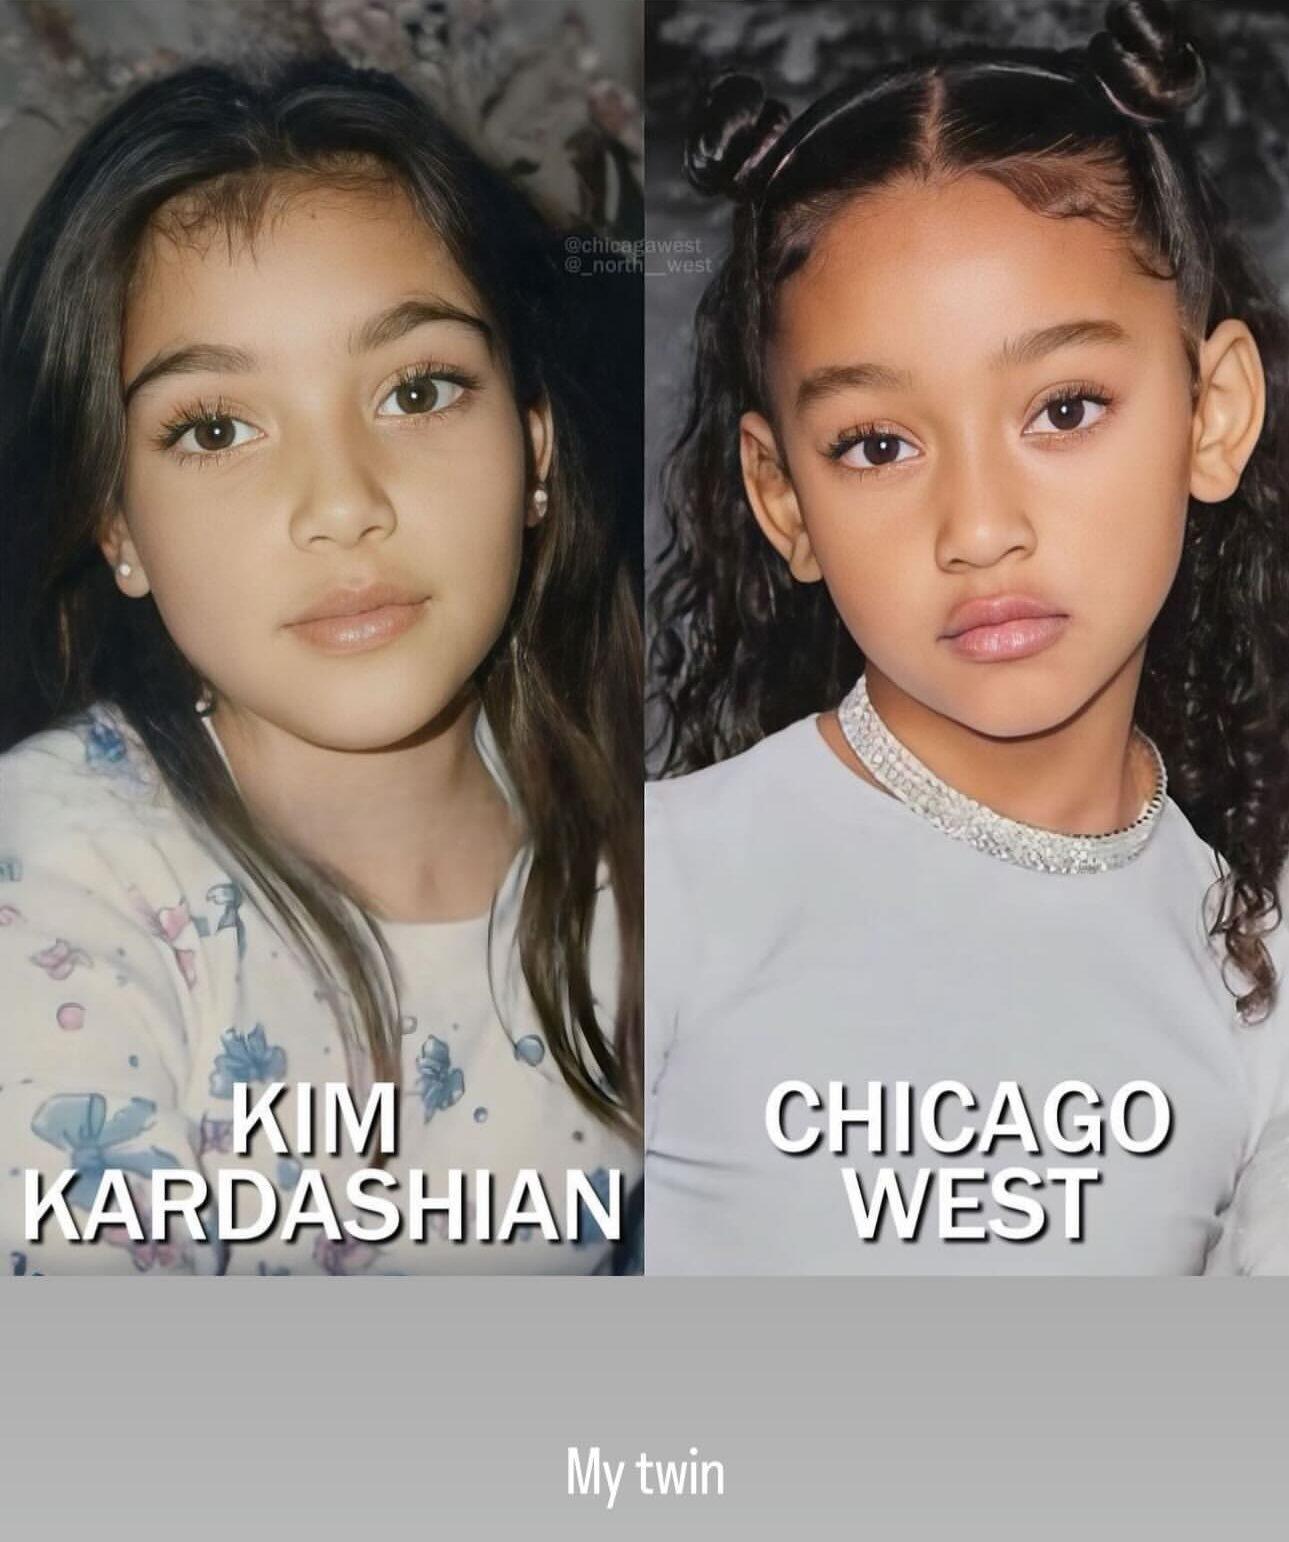 Kim Kardashian Compares Adorable Childhood Photo Of Herself To Her 'Twin' Chicago